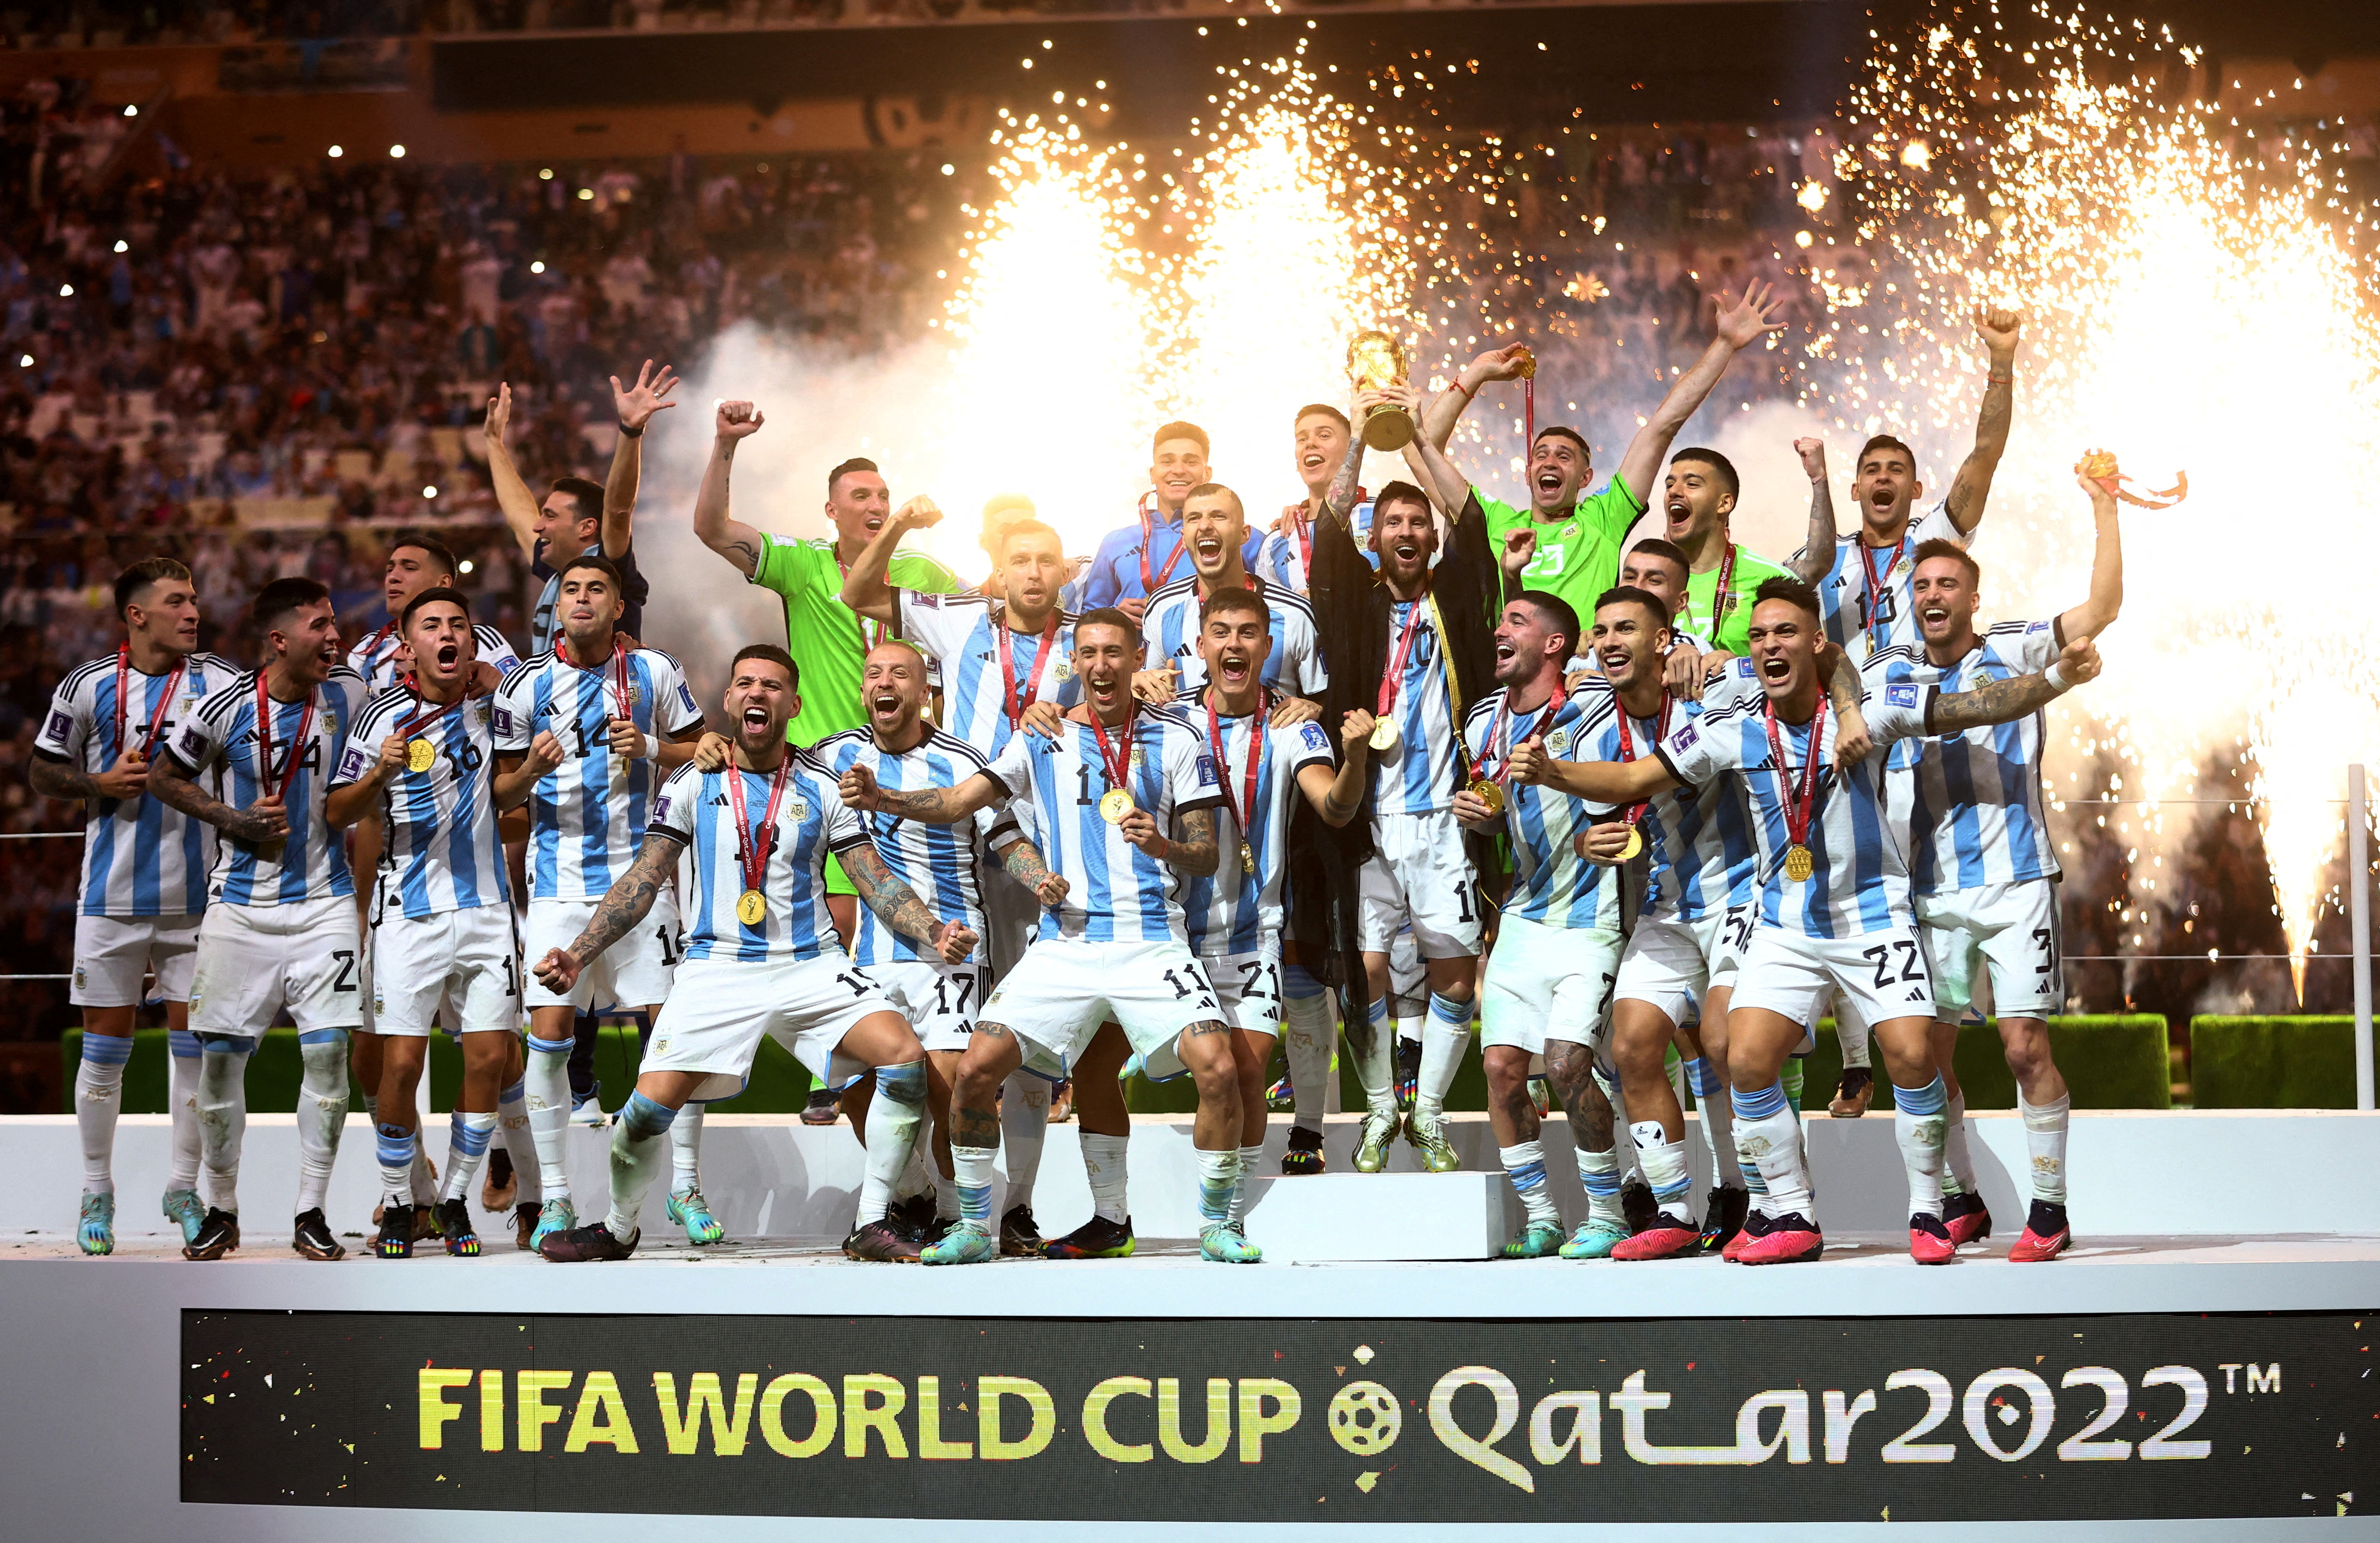 FILE PHOTO: Soccer Football - FIFA World Cup Qatar 2022 - Final - Argentina v France - Lusail Stadium, Lusail, Qatar - December 18, 2022 Argentina's Lionel Messi celebrates with the trophy and team mates after winning the World Cup REUTERS/Carl Recine/File Photo